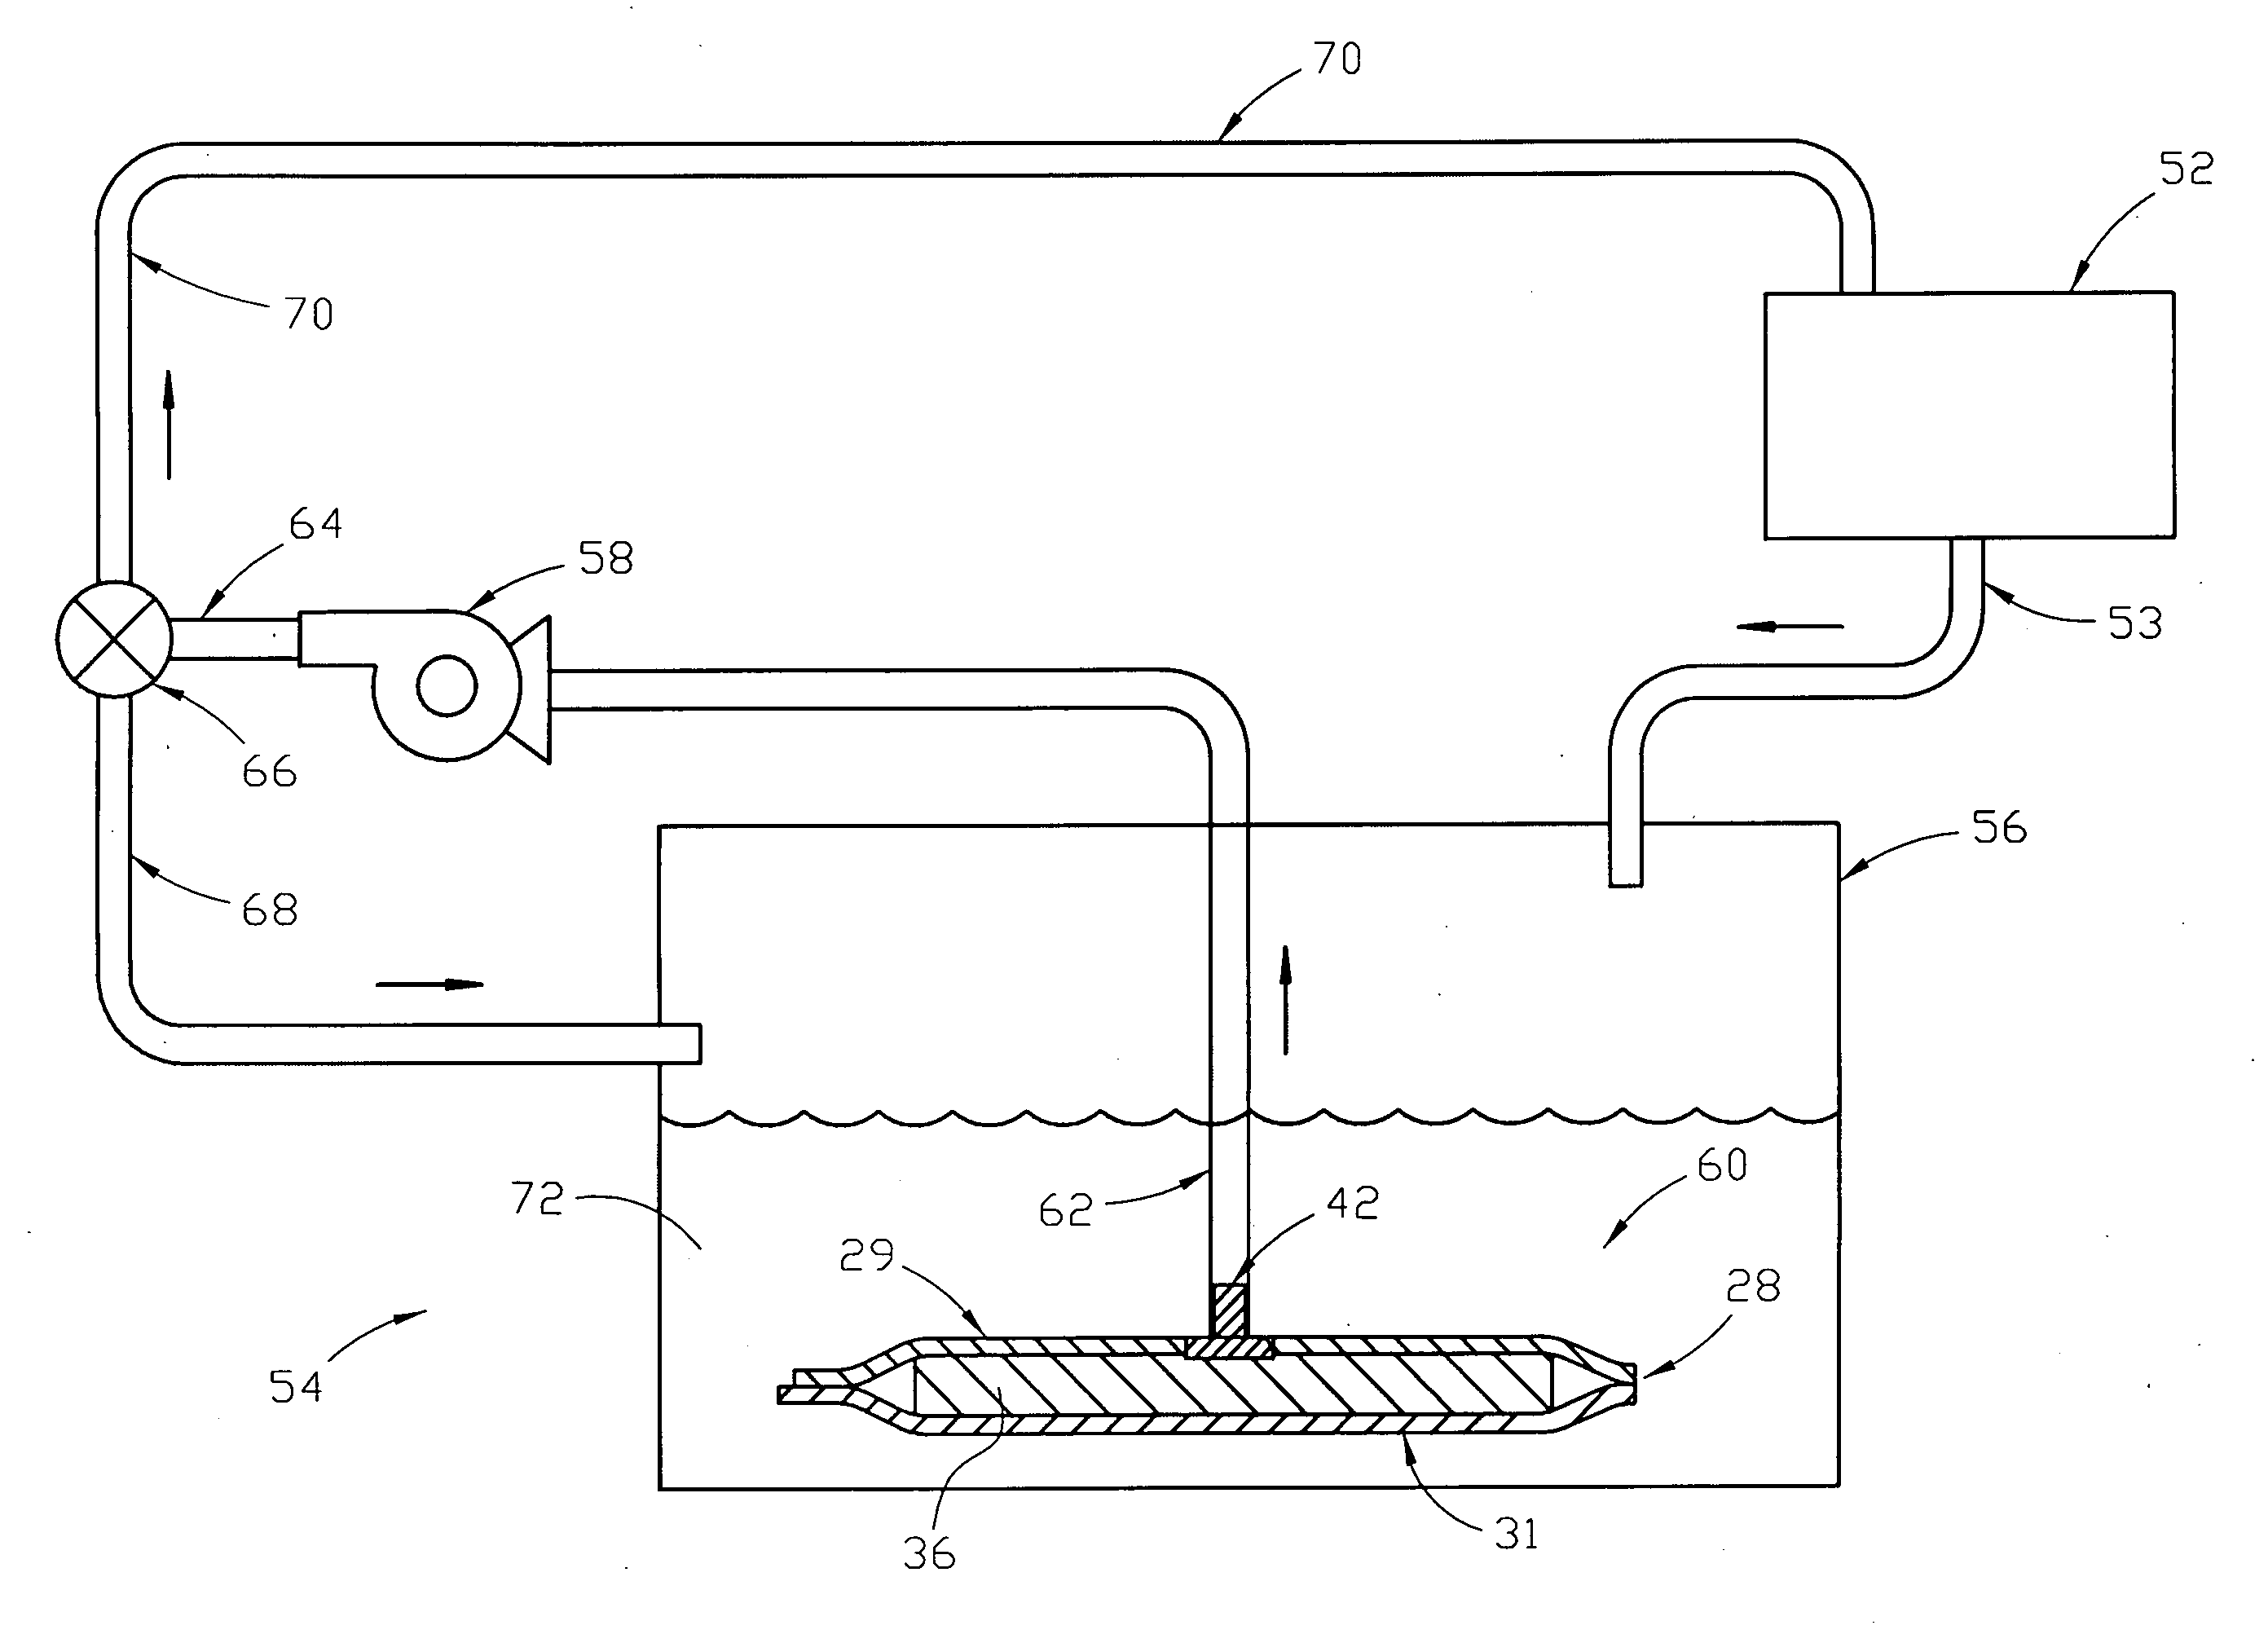 Method for filtering cooking oil used in frying process